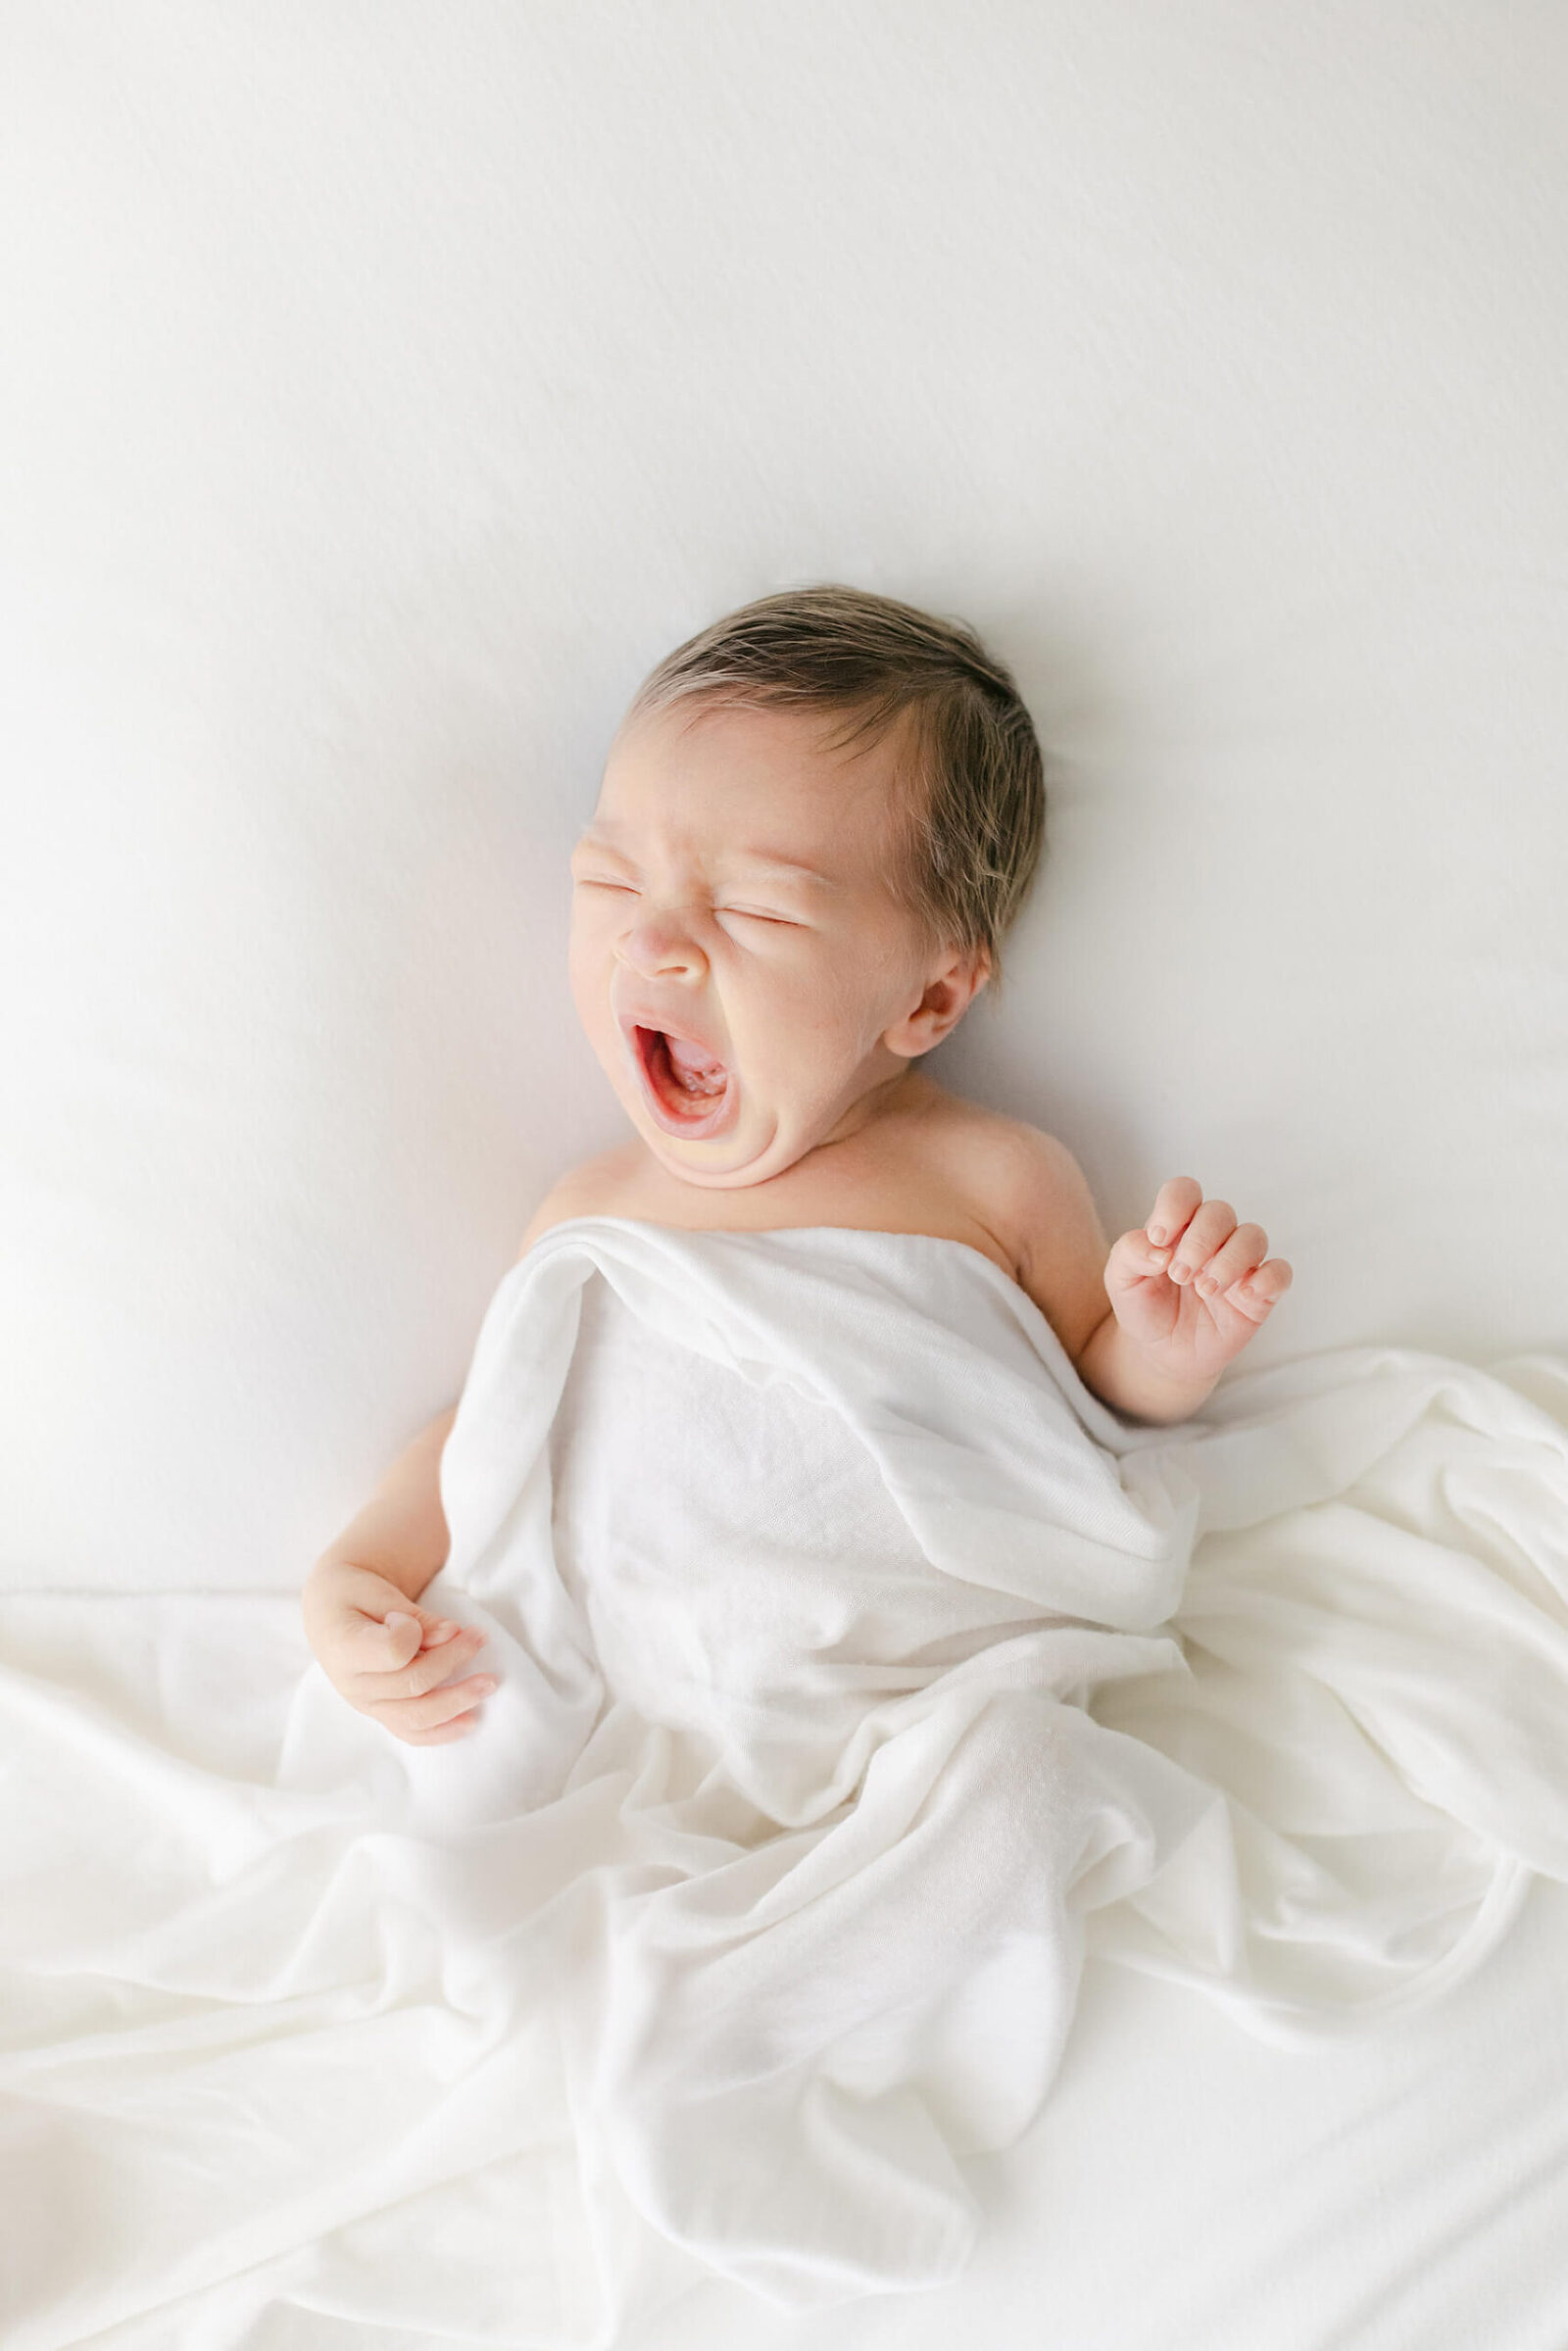 newborn yawn is captured beautifully in this photography session in birmingham AL